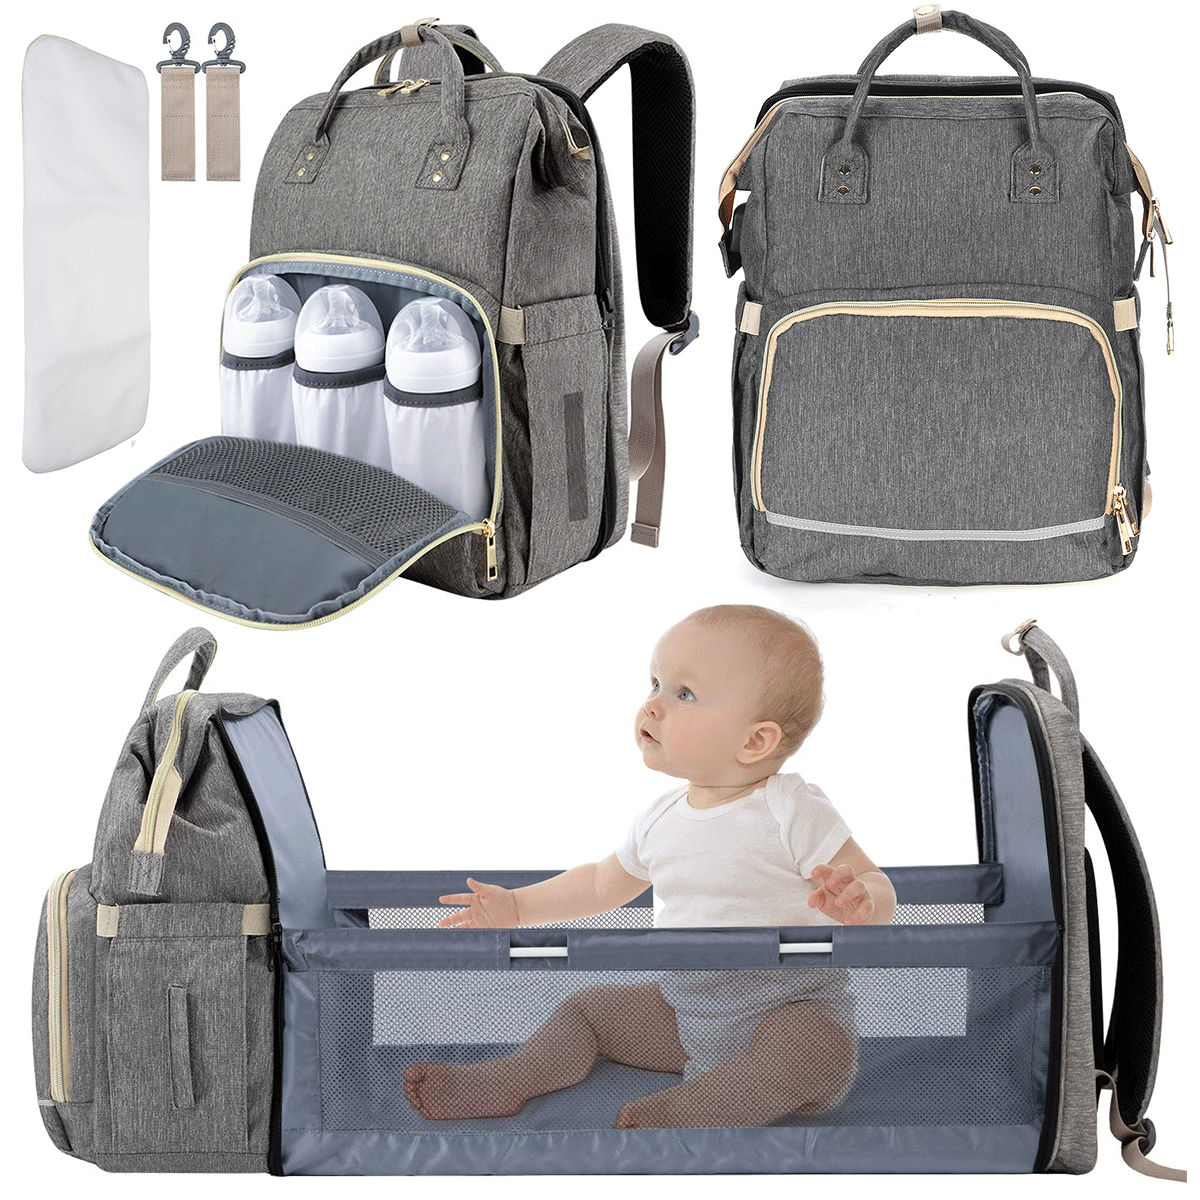 Large Upgrade Diaper Bag Backpack Foldable Travel Baby Bed with Changing  Station,Crib Diaper Backpack,Multifunctional Waterproof Portable Baby Bag